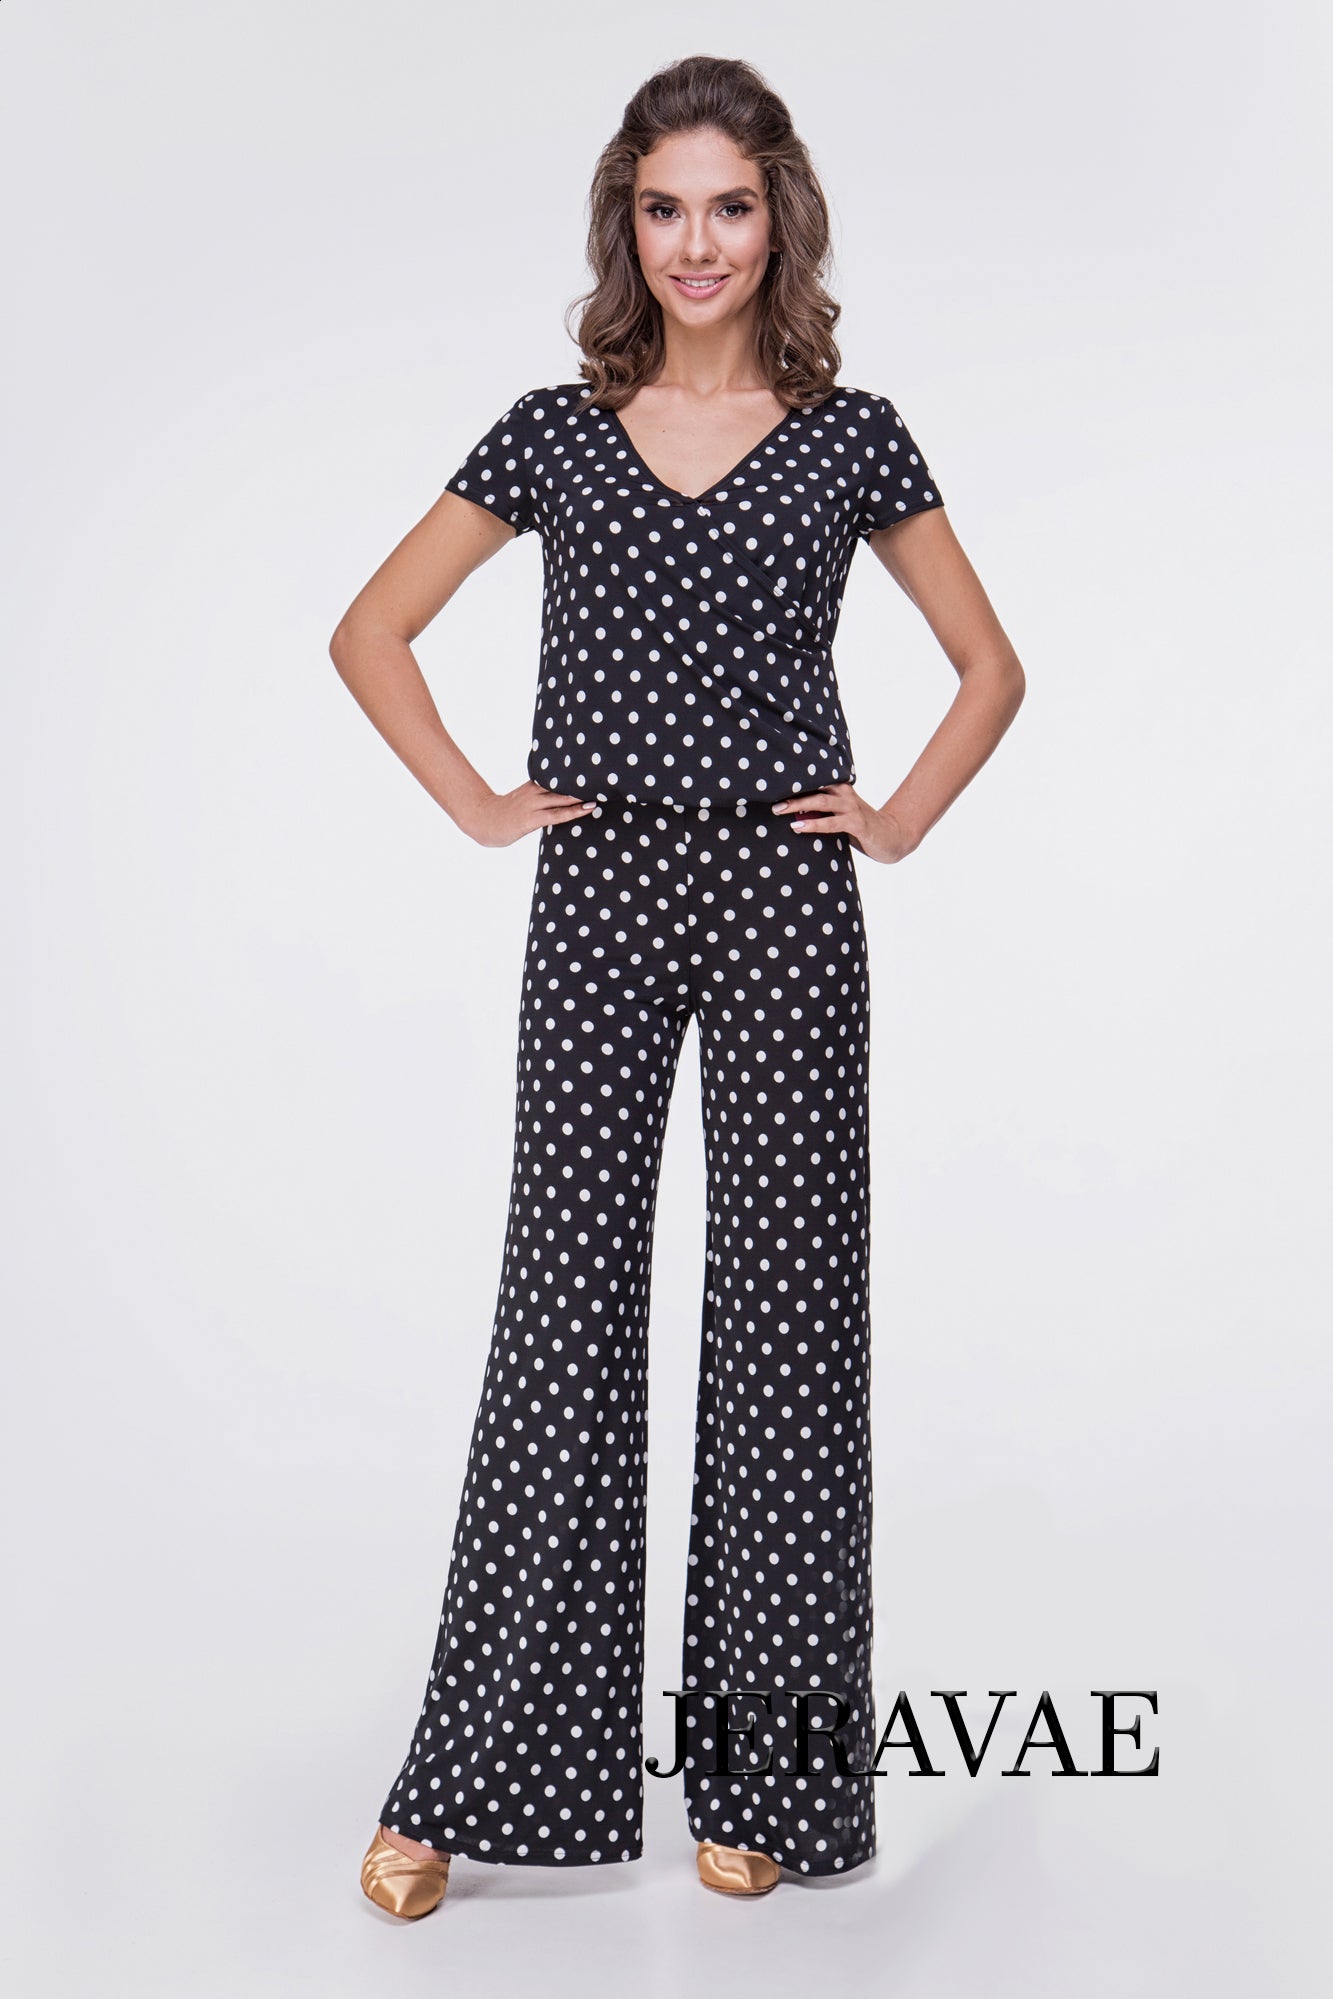 Polka Dot One Piece Ballroom or Latin Jumpsuit in Black and White with Short Sleeves